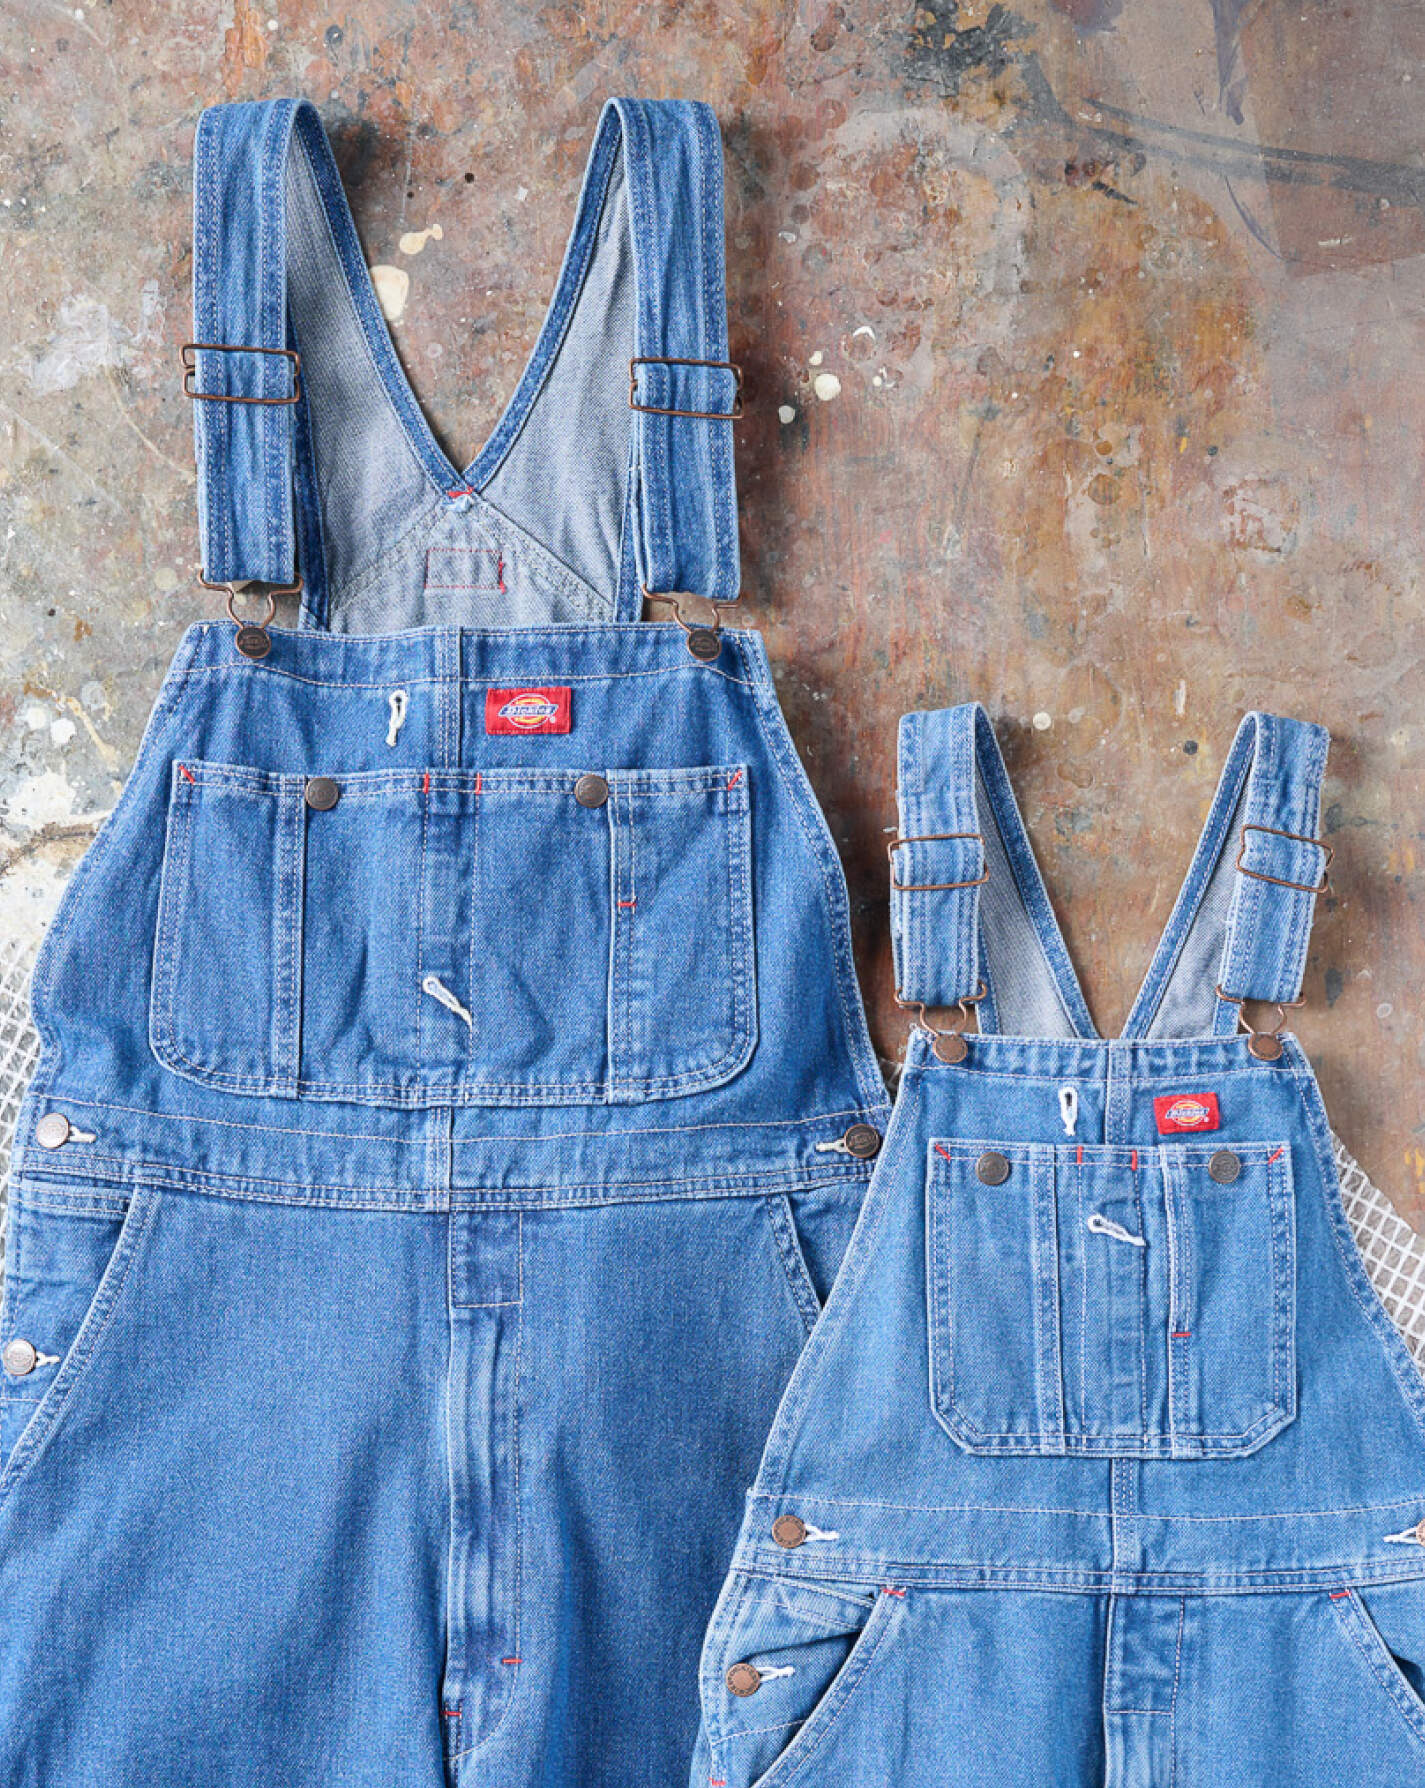 matching mens and kids overalls